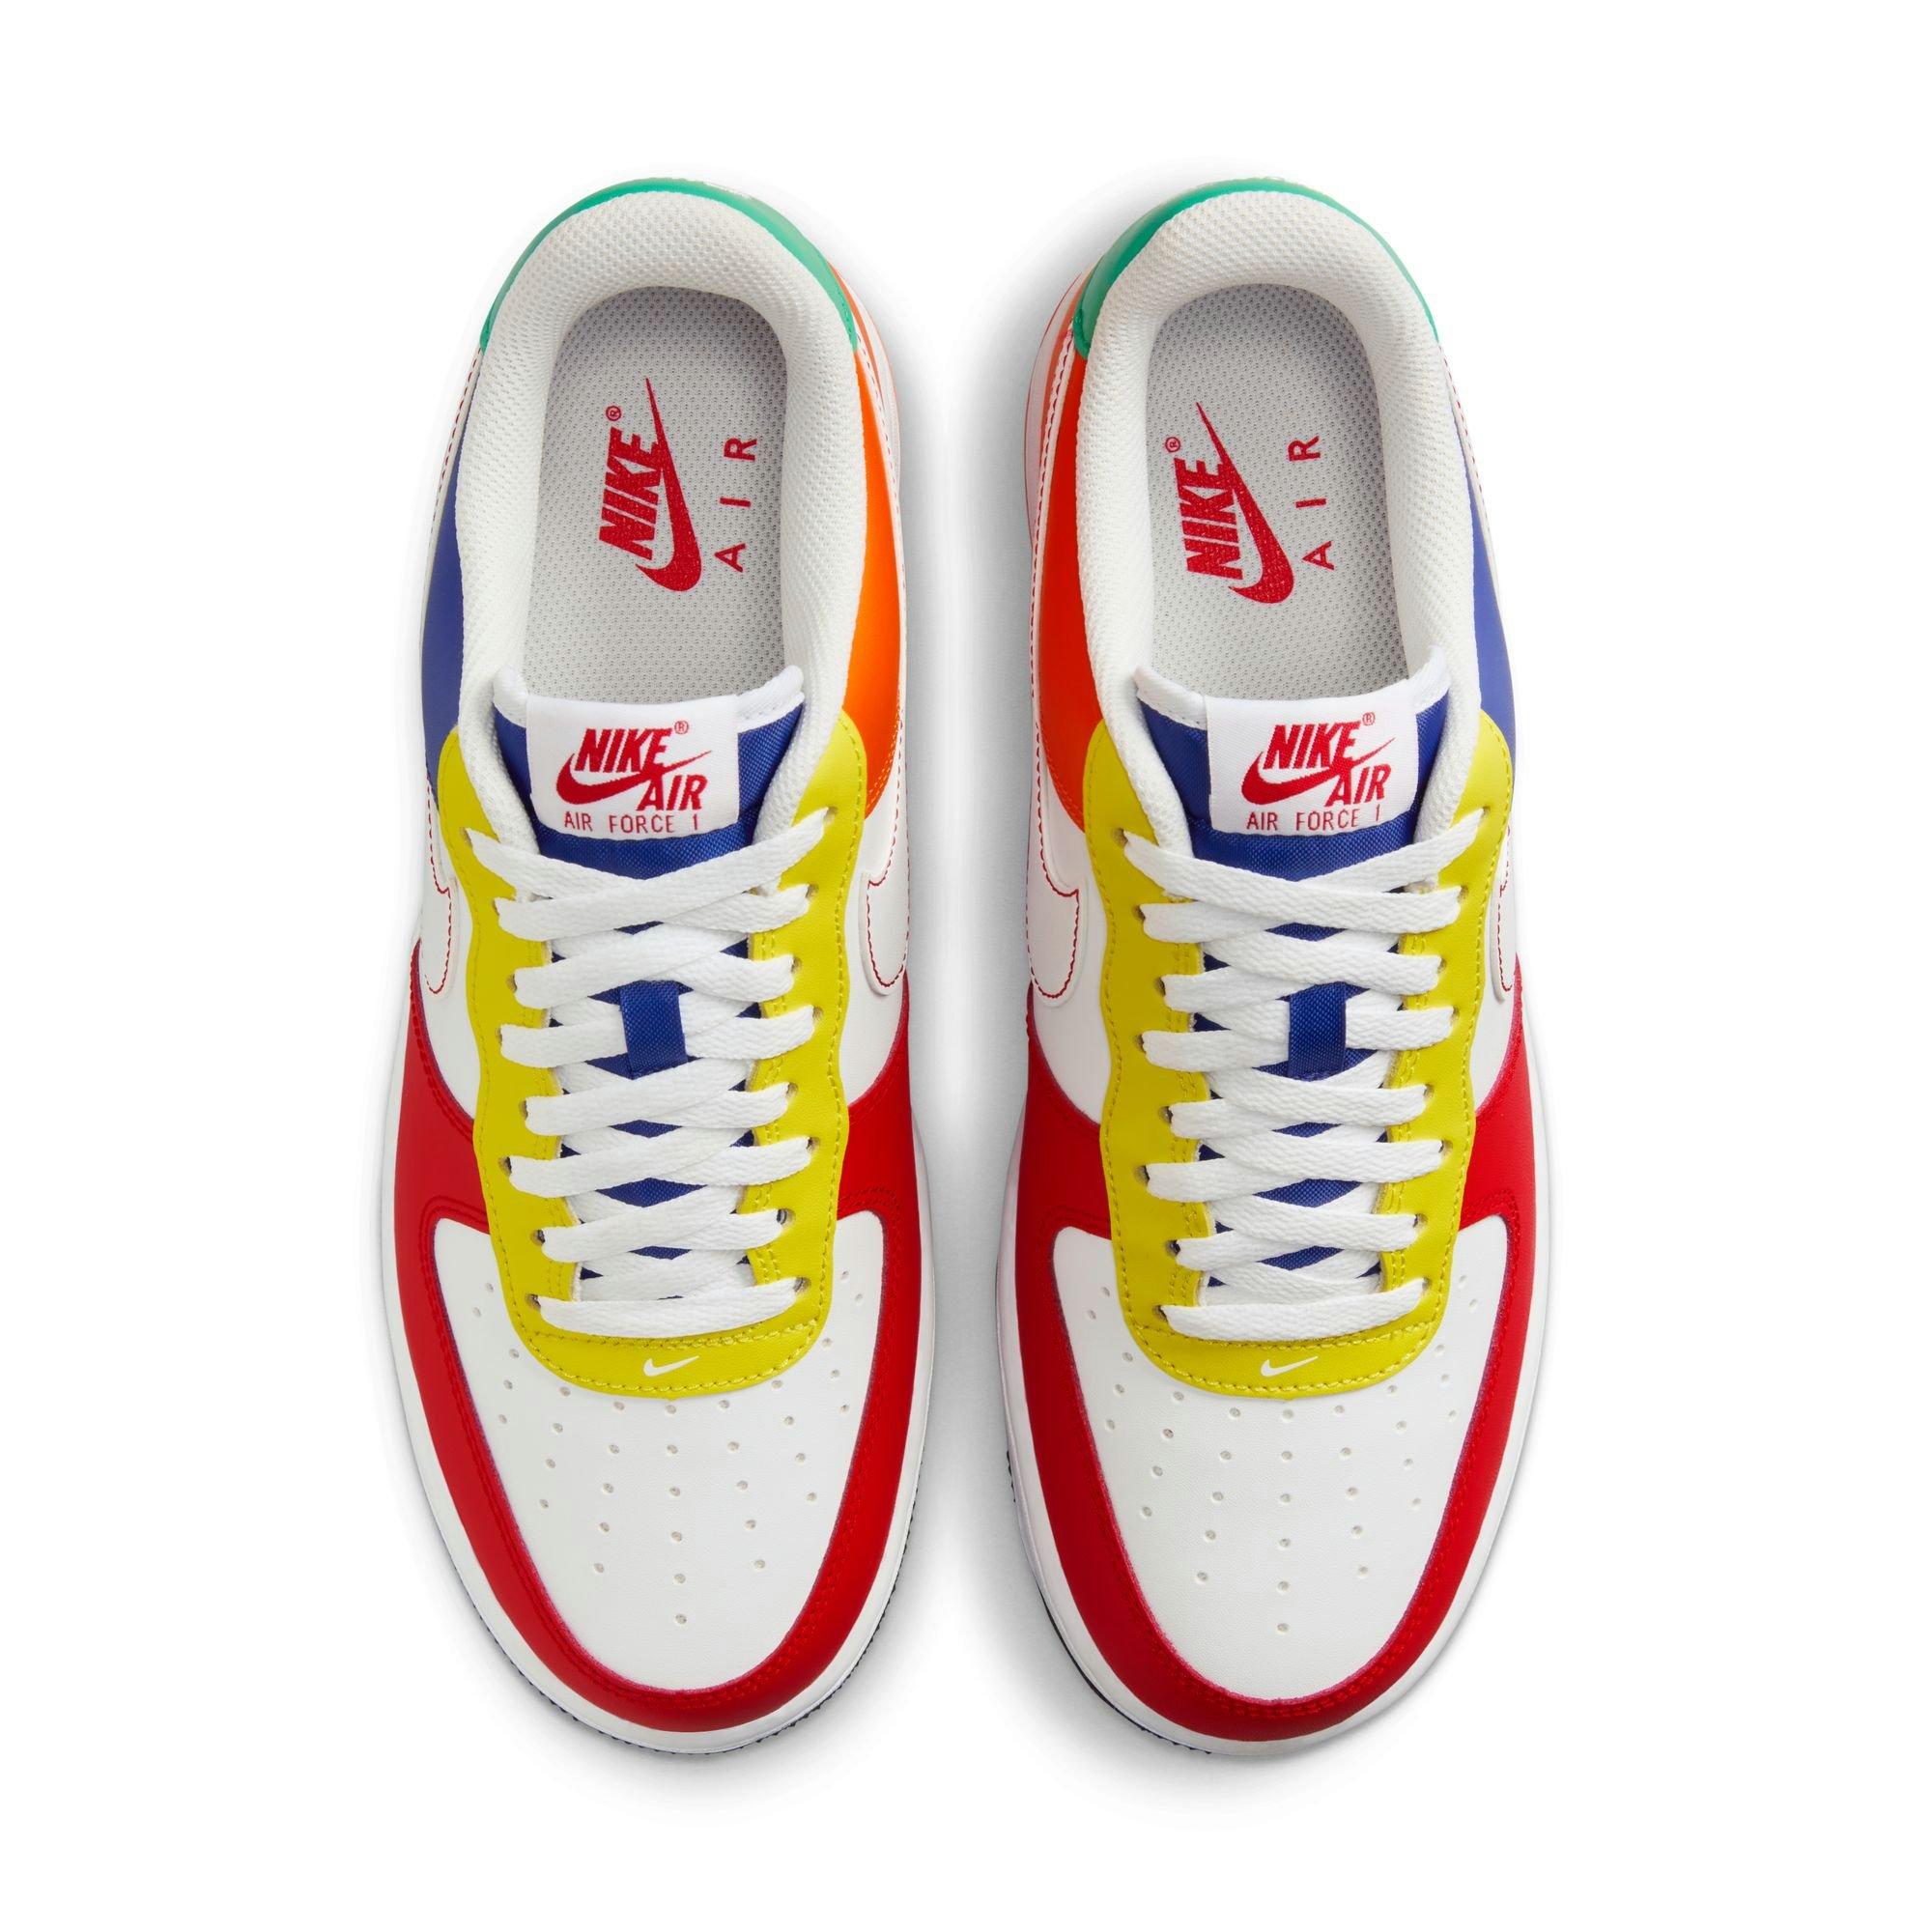 Nike Air Force 1 Low Atlanta The Dirty | Size 8, Sneaker in Multicolor/Red/Grey